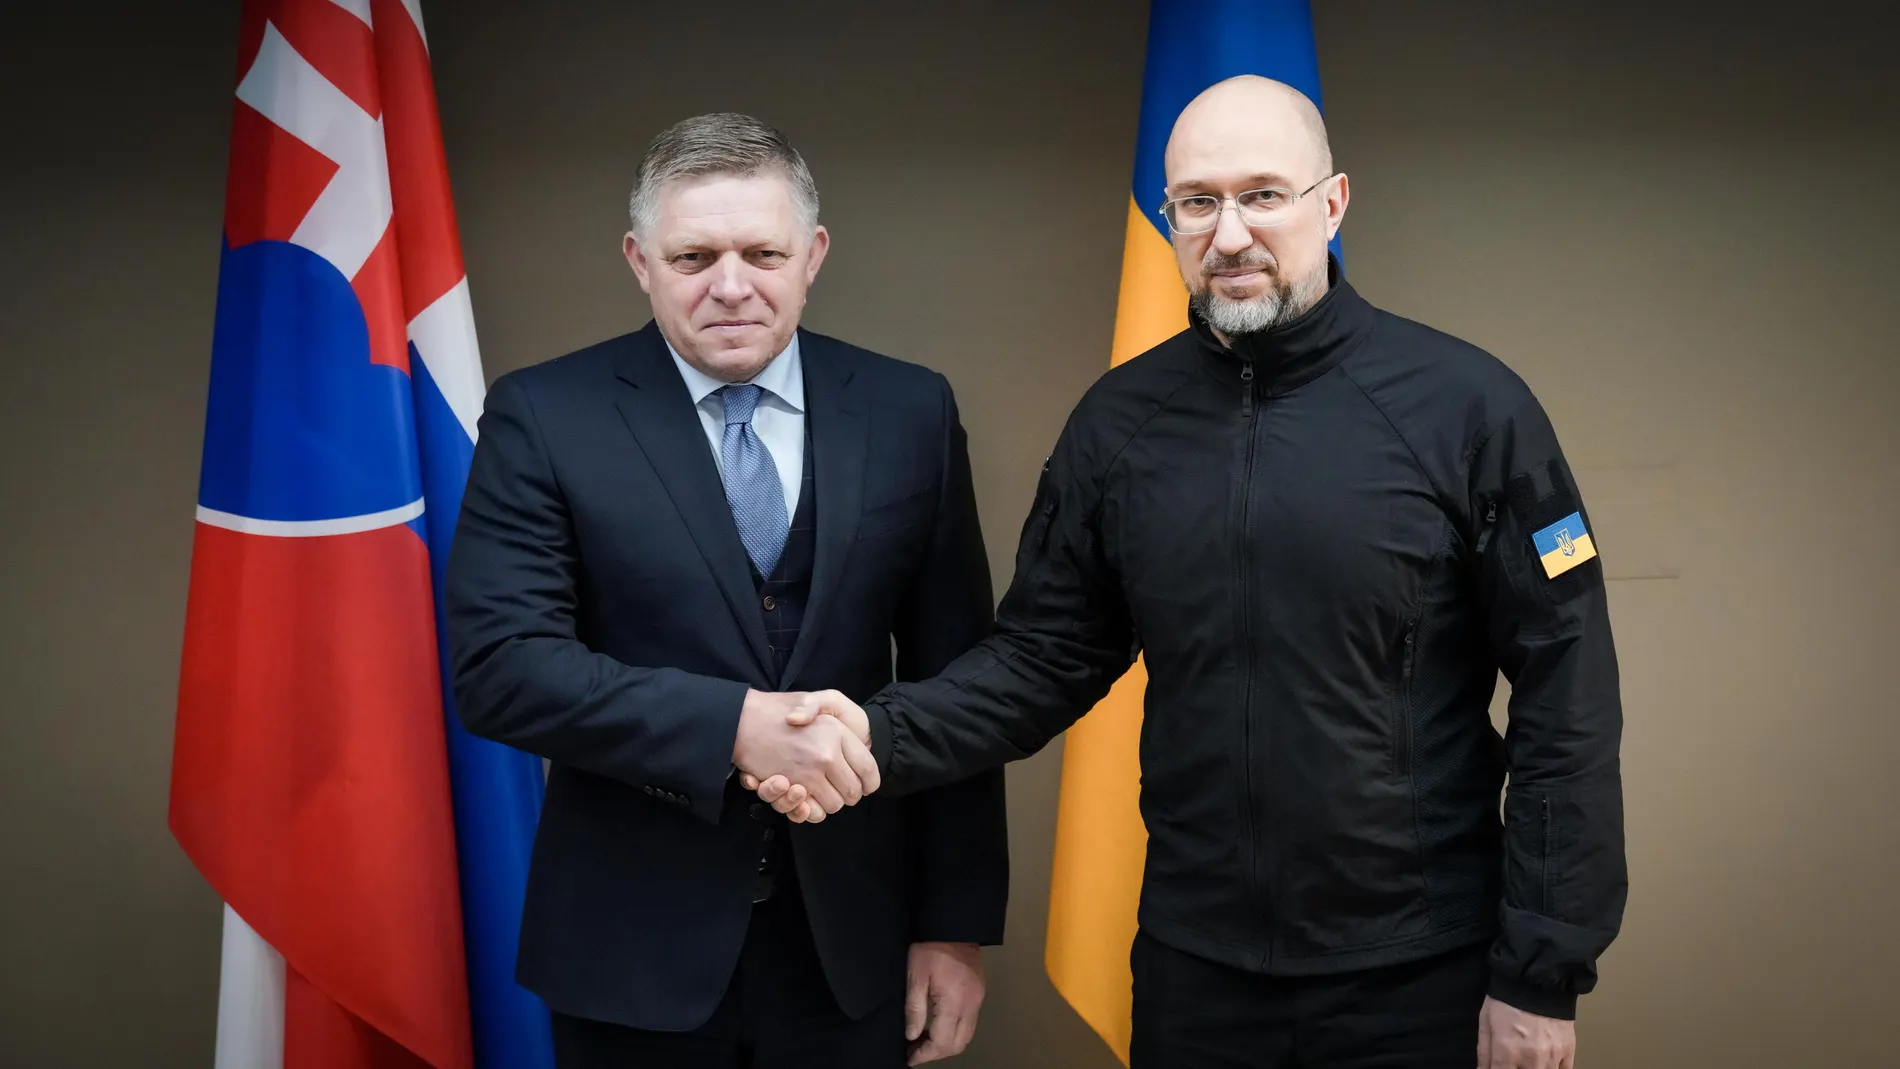 Uzhhorod (Ukraine), 24/01/2024.- A handout photo made available by the Slovakia's Prime Minister's Office shows Ukraine's Prime Minister Denys Shmyhal (R) and Slovakia's Prime Minister Robert Fico (L) meeting in the Western-Ukrainian city of Uzhhorod, Ukraine, 24 January 2024. Robert Fico and Denys Shmyhal signed a joint statement that will strengthen bilateral relations based on mutual trust and respect, Shmyhal announced. (Eslovaquia, Ucrania) EFE/EPA/Lubos Bilacic/Slovakia's Prime Minister...